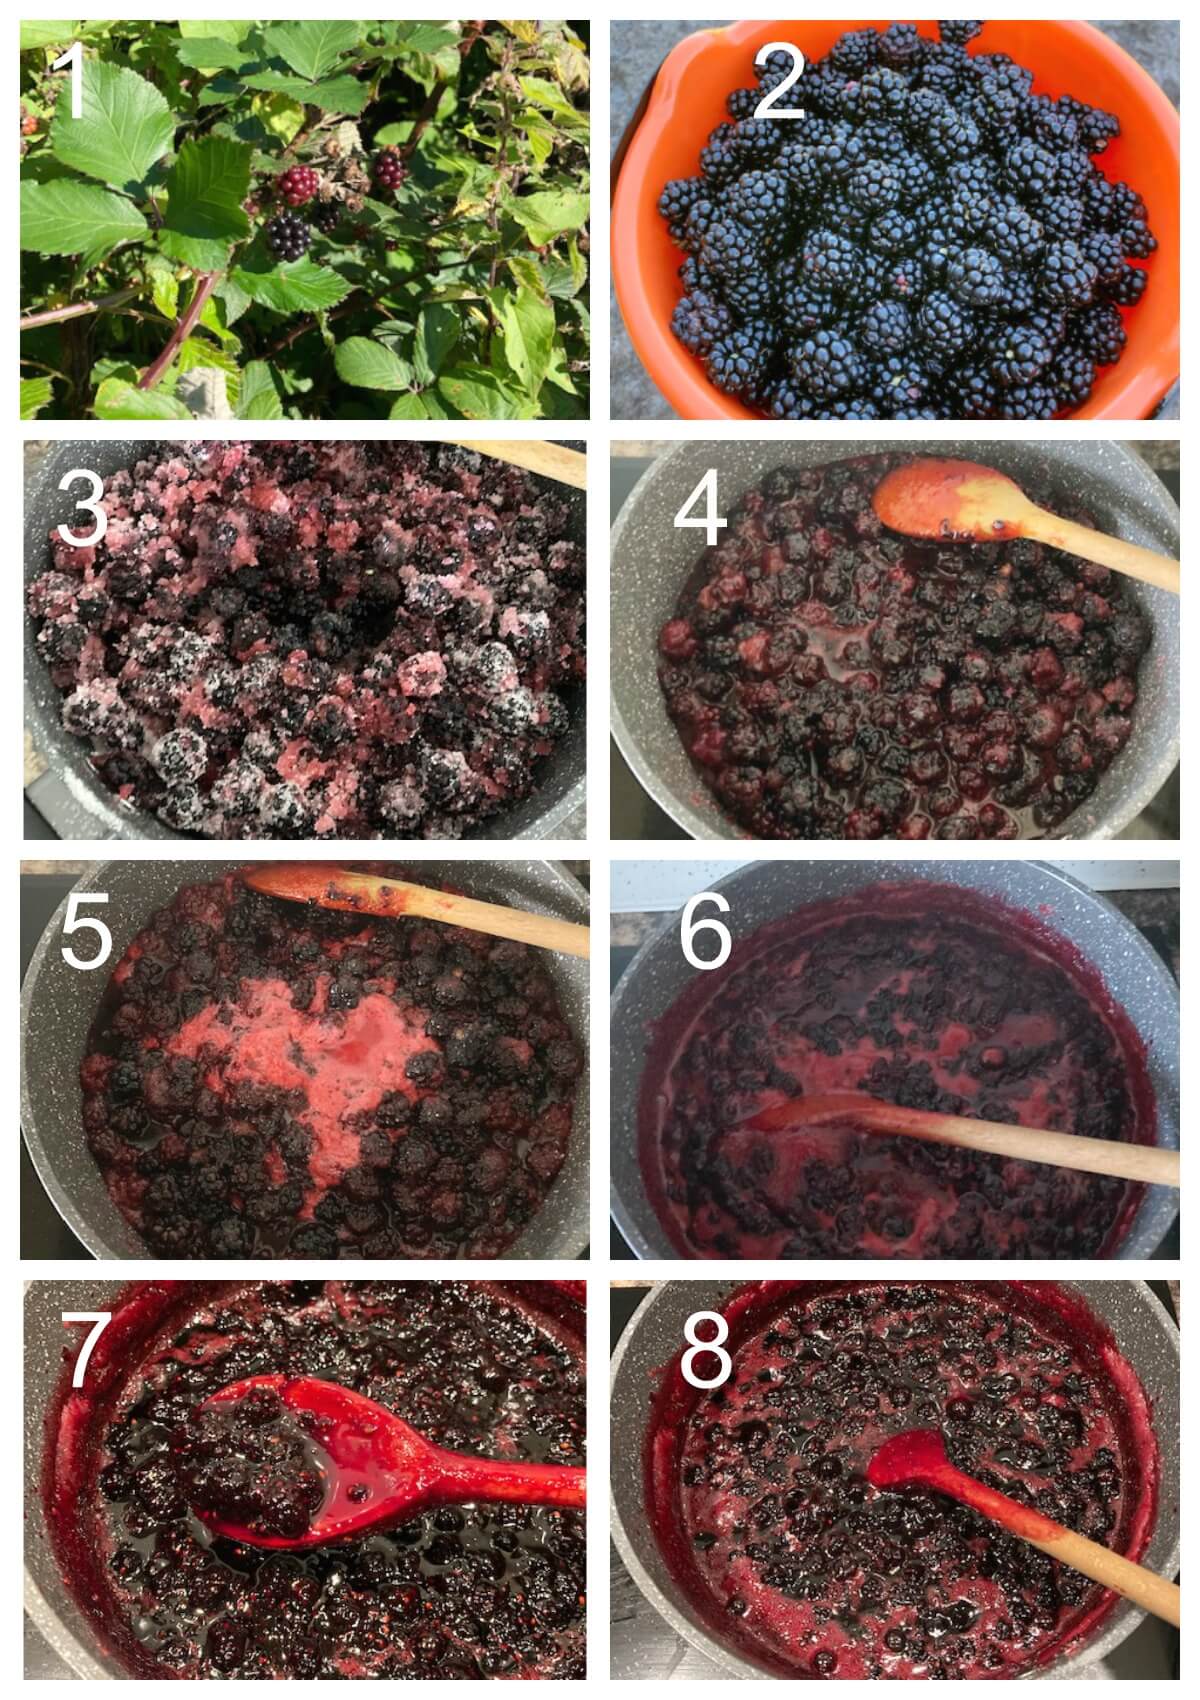 Collage of 8 photos to show how to make blackberry jam.